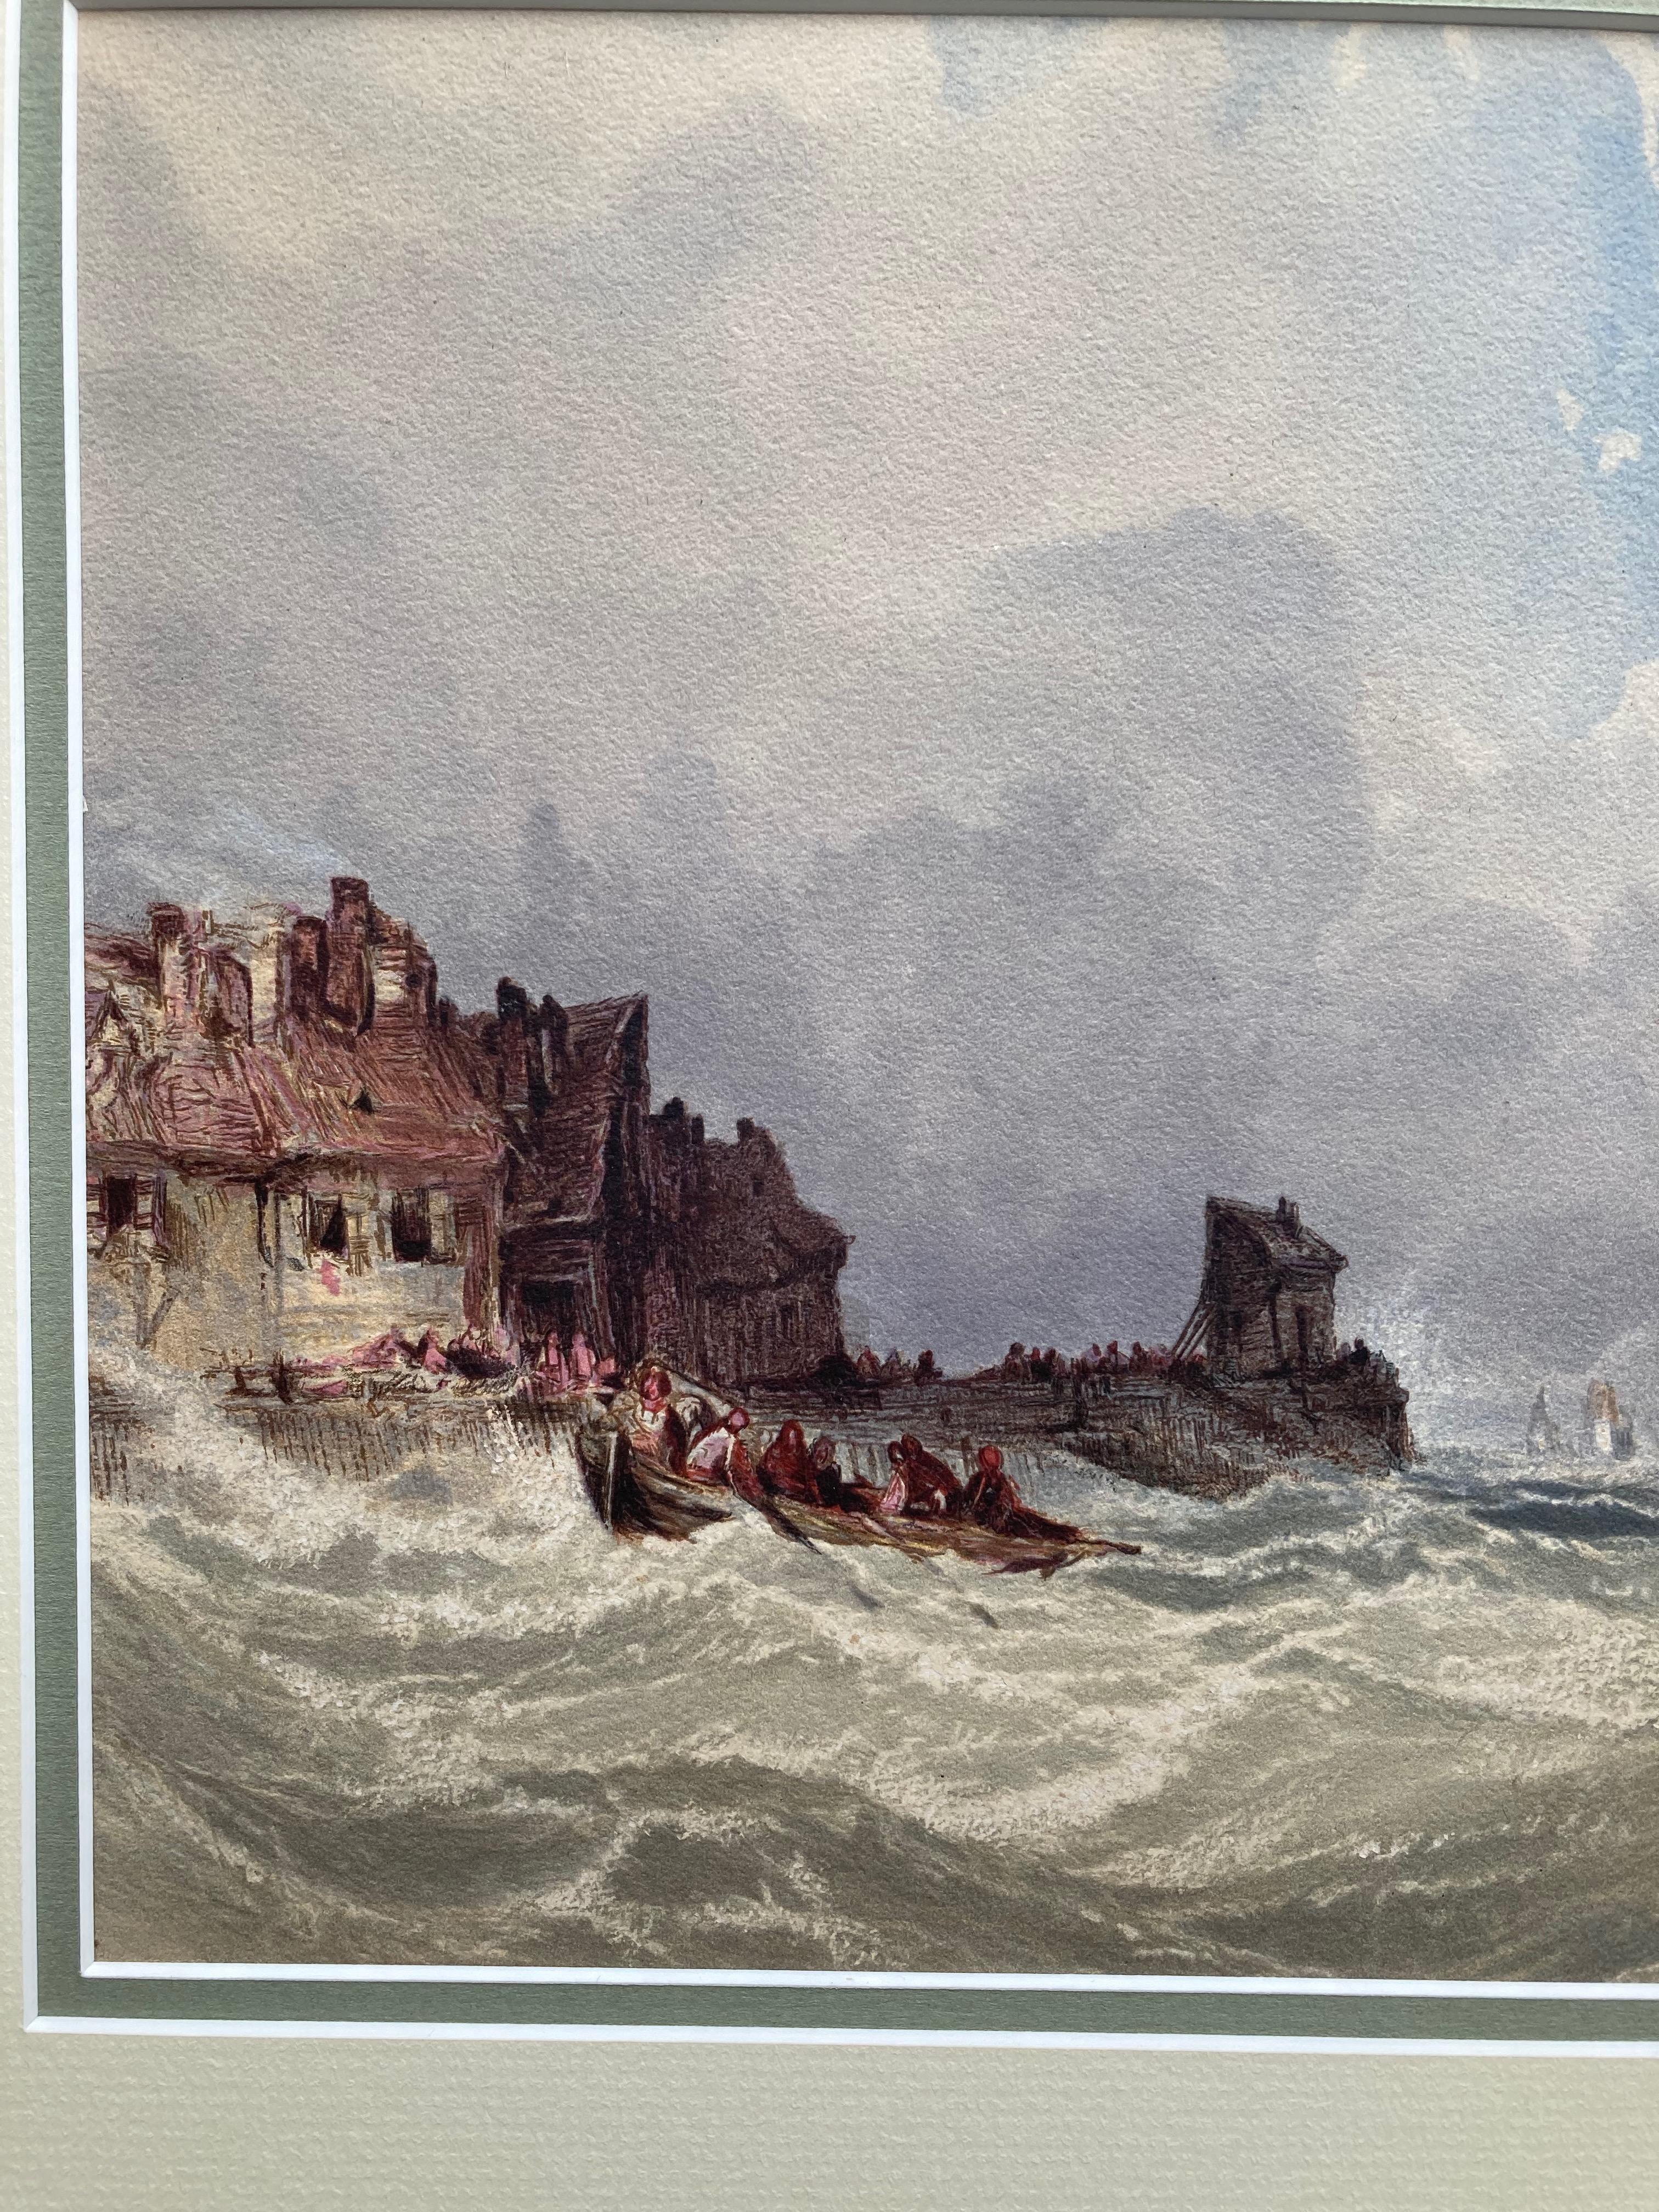 A very skilfully captured image of a dramatic seascape with vessels in choppy water.

Charles Bentley (1806-1854)
Vessels by a harbour in a swell
Signed and dated 1846
Watercolour and scratching out
9 x 14¼ inches
14½ x 19¼ inches with the